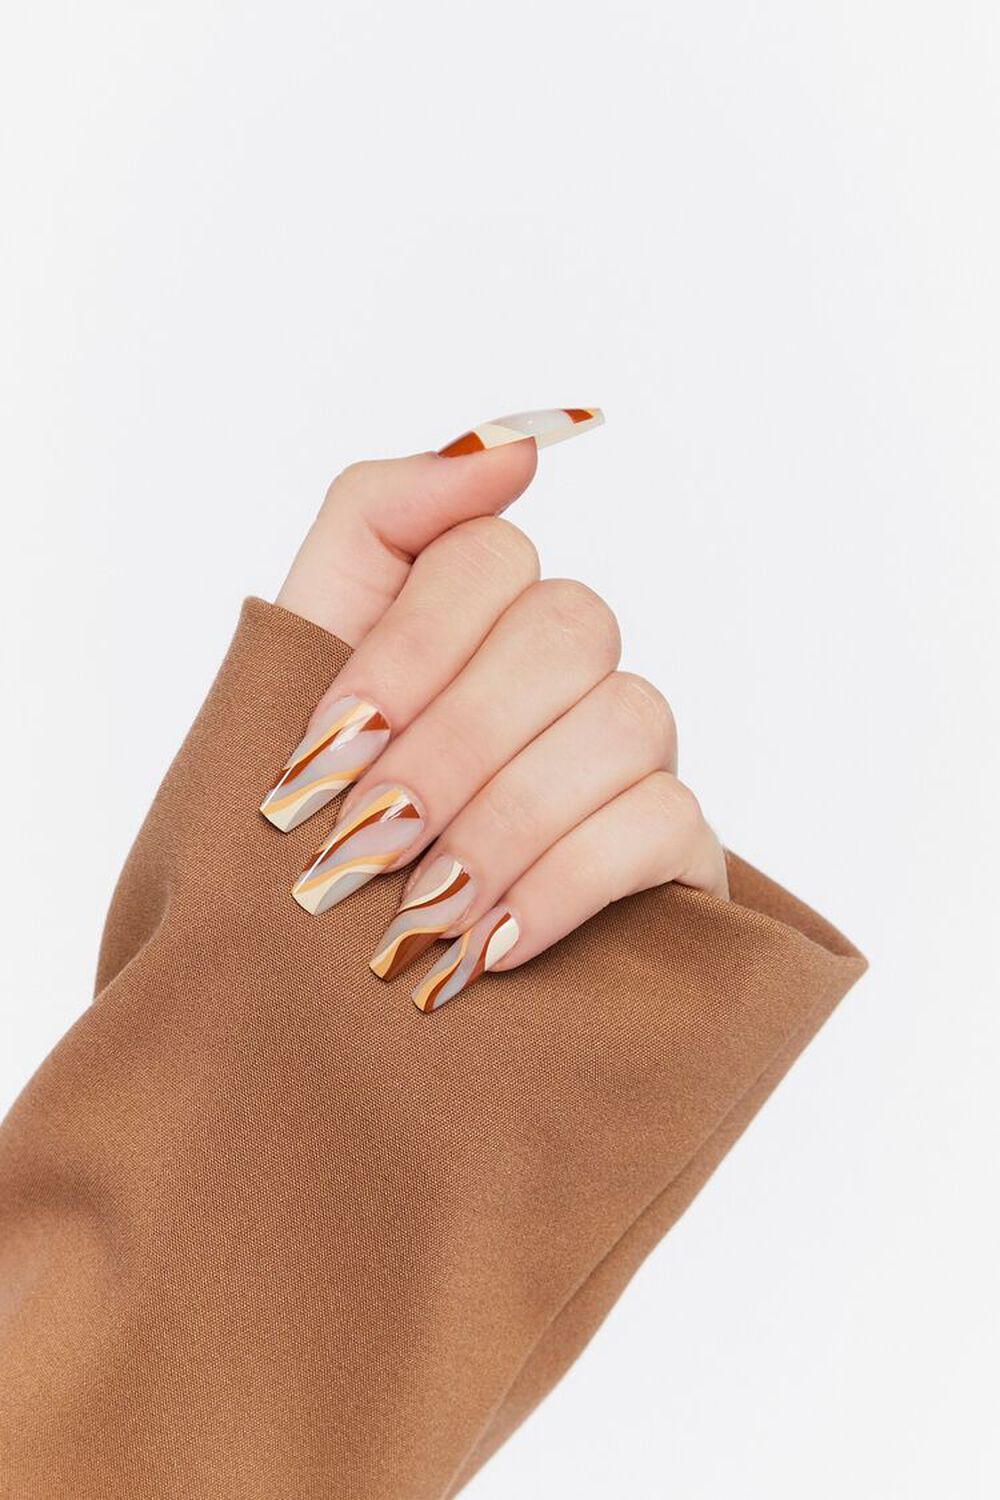 CLEAR/BROWN Wavy Striped Press-On Nails, image 2